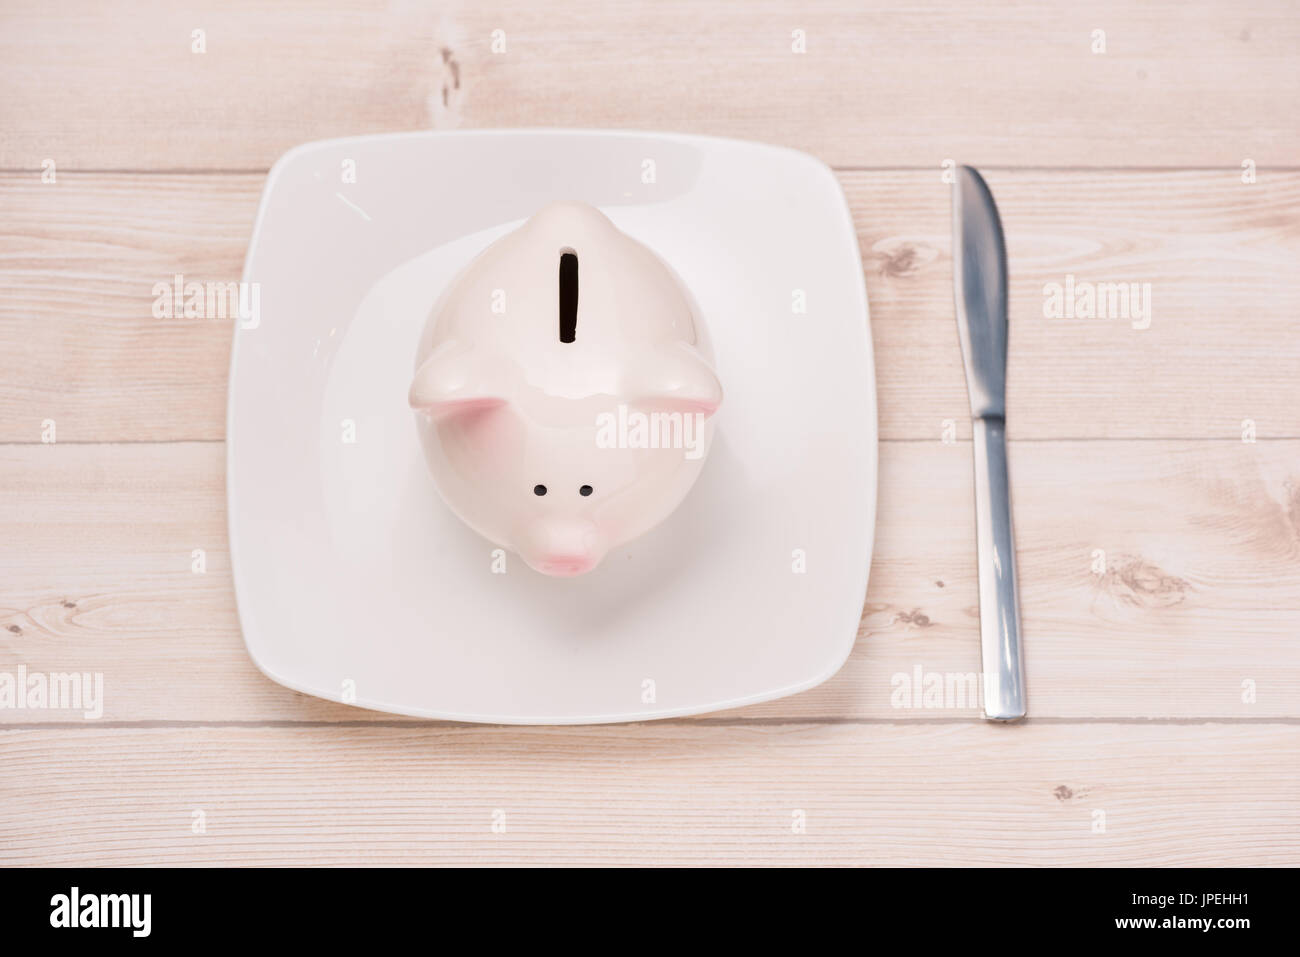 A pink piggy bank on dish. Financial concept. Stock Photo